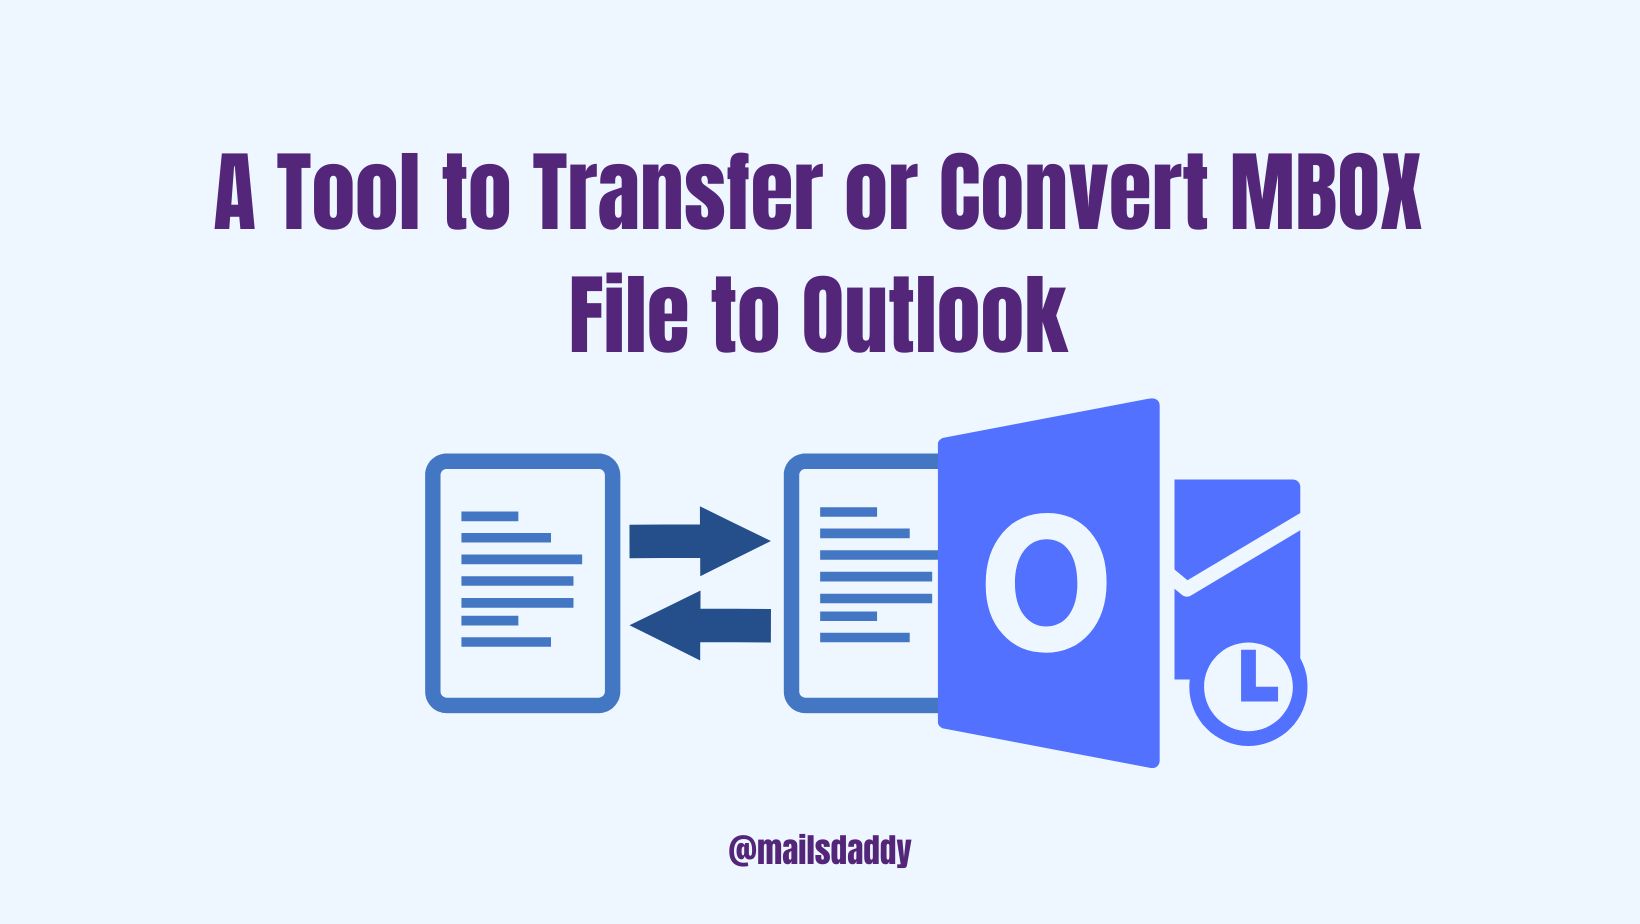 A Tool to Transfer or Convert MBOX file to Outlook